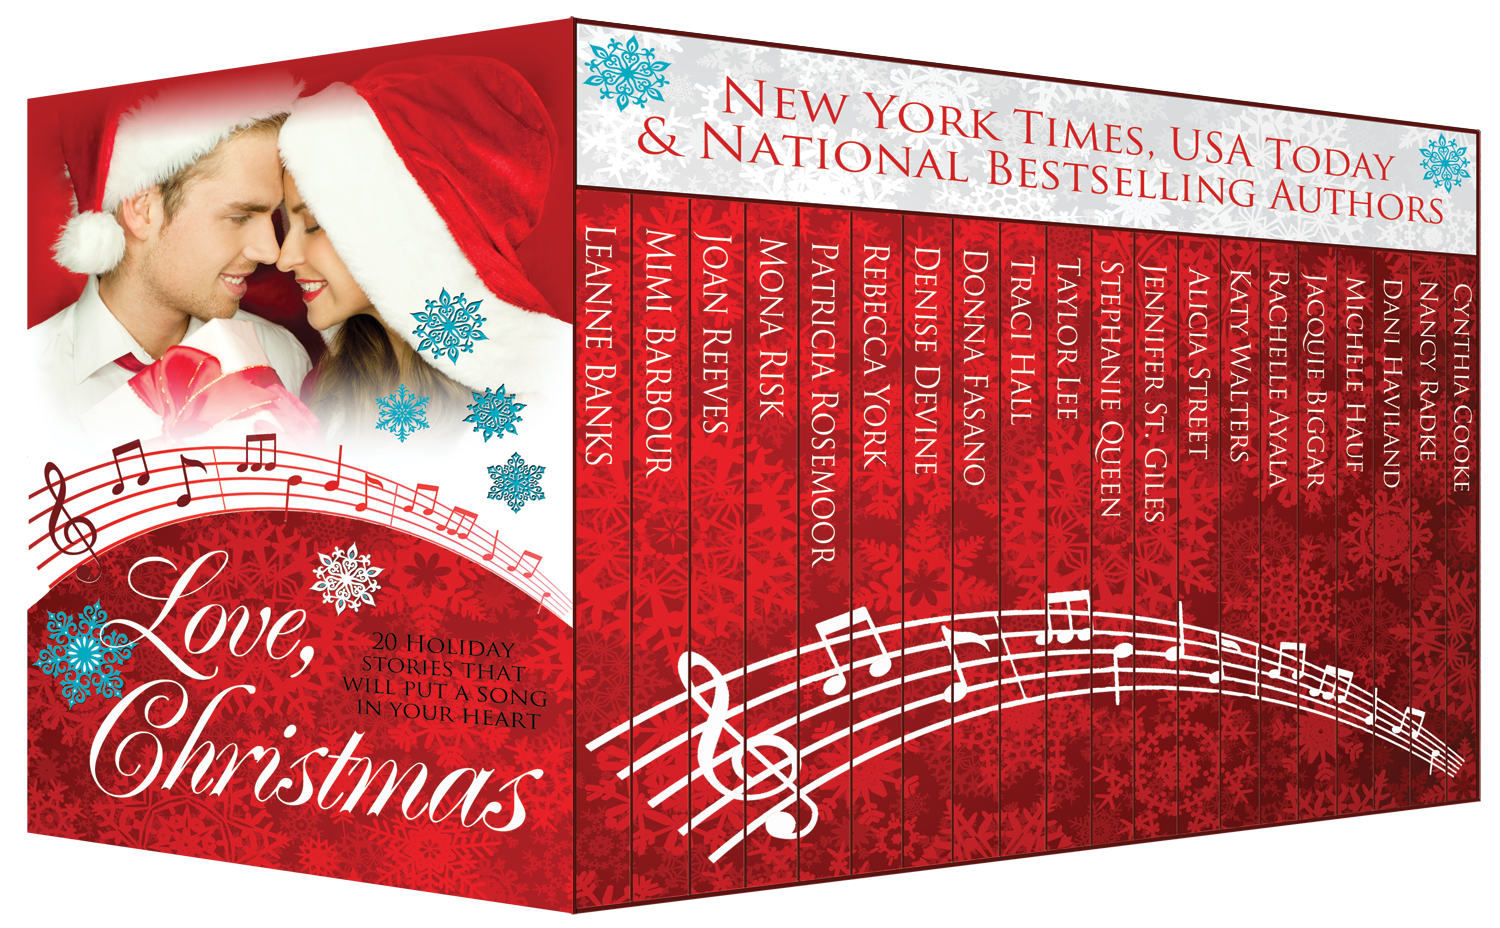 Love, Christmas by Mimi Barbour & 19 other authors from Authors’ Billboard